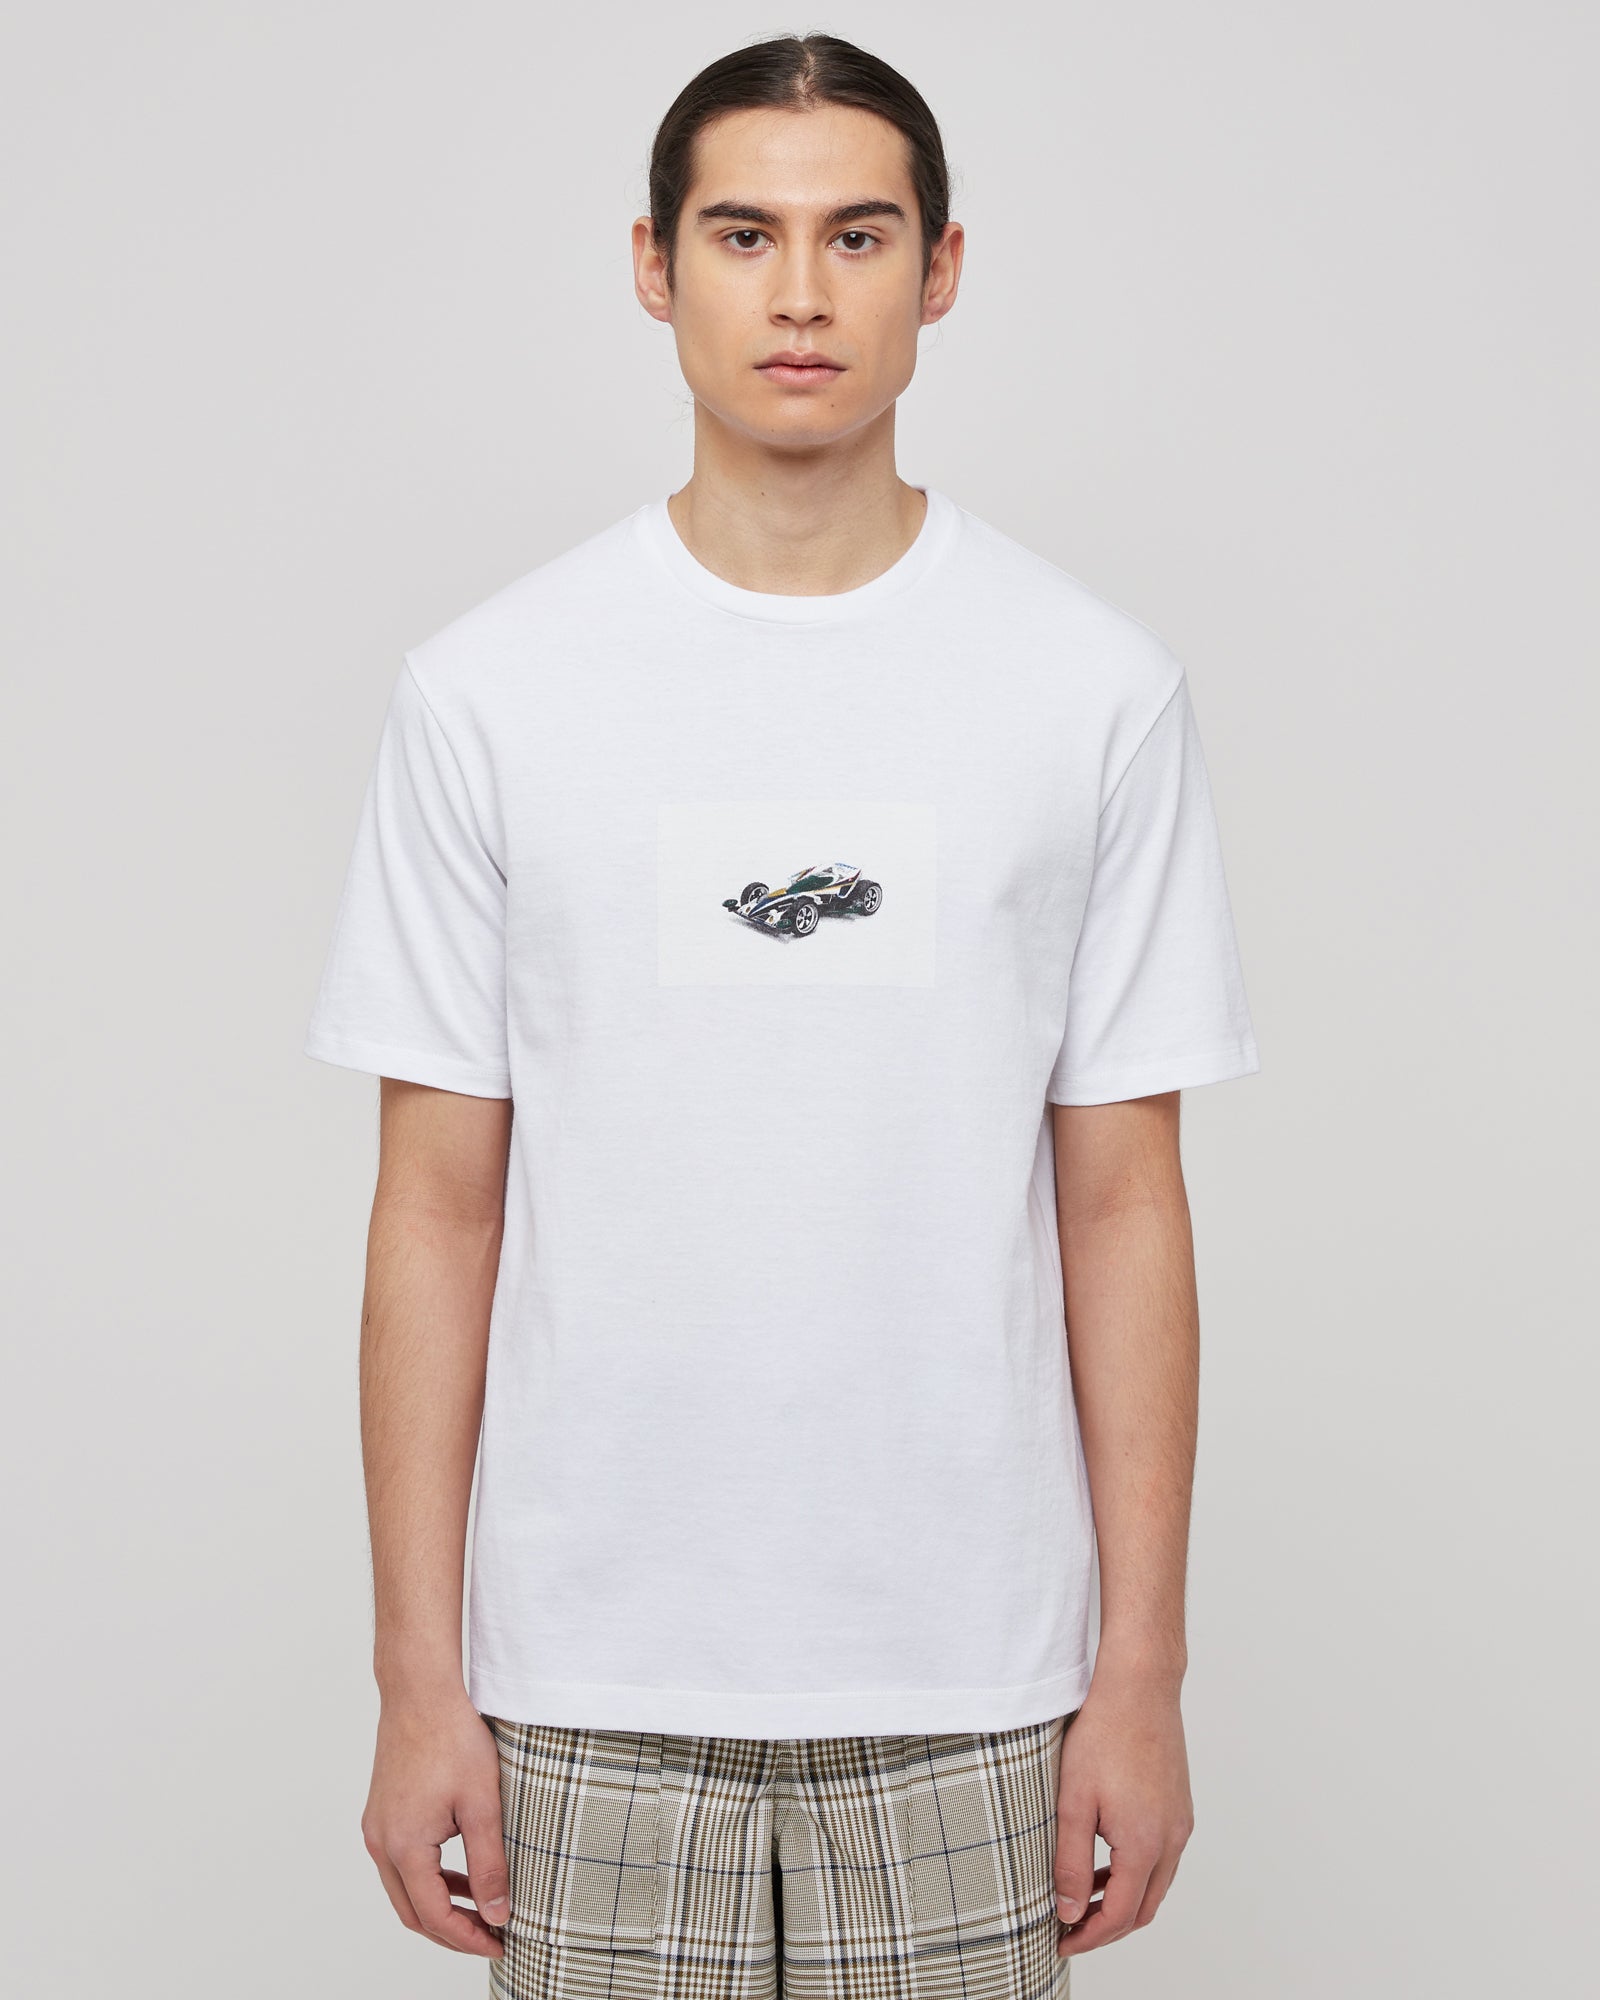 Goodfight x RG Super 1 Tee in White